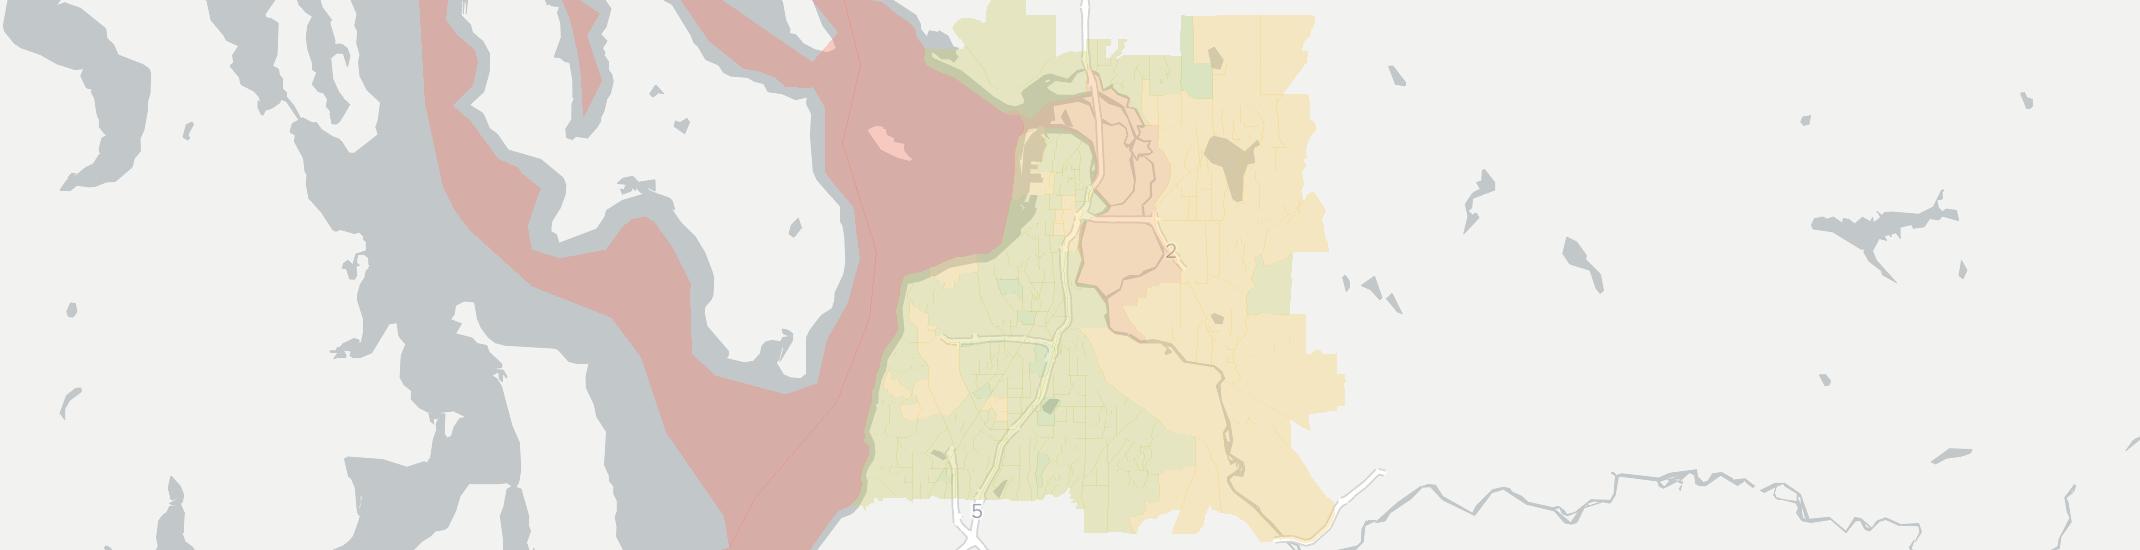 Everett Internet Competition Map. Click for interactive map.